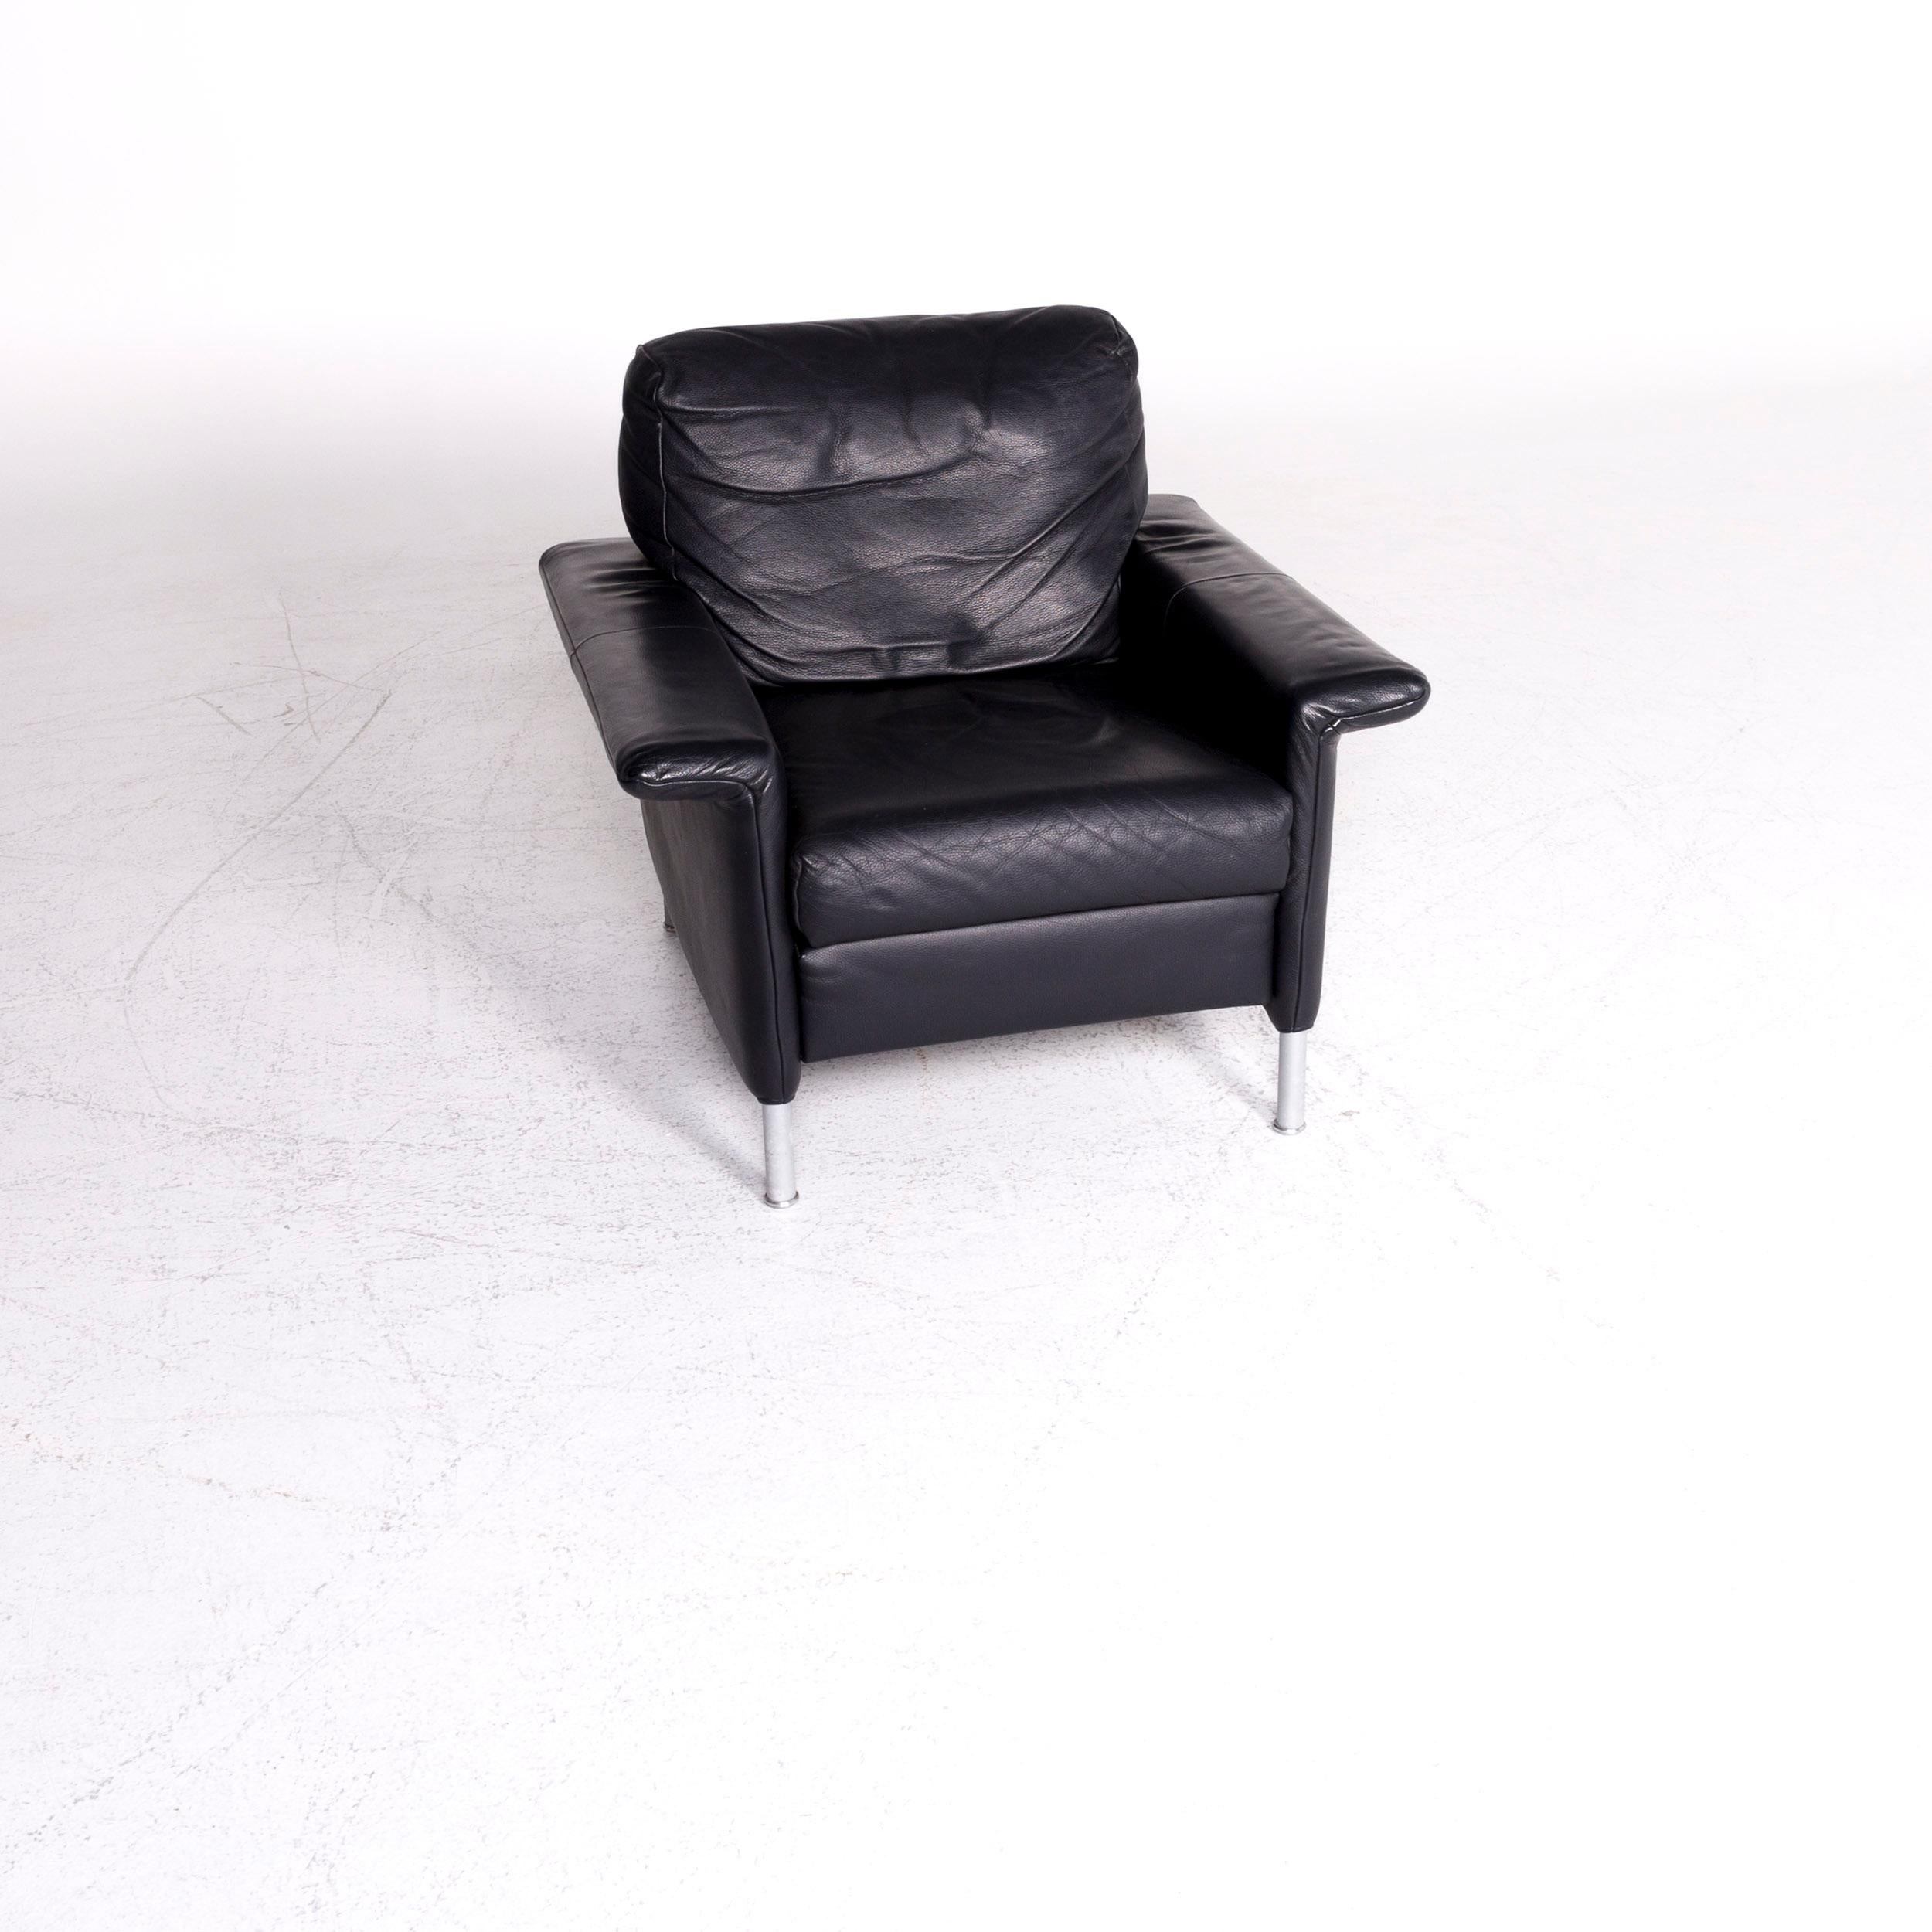 We bring to you a Rolf Benz 3300 designer leather armchair blue armchair.

Product measurements in centimeters:

Depth 87
Width 85
Height 78
Seat-height 44
Rest-height 54
Seat-depth 50
Seat-width 50
Back-height 38.
    